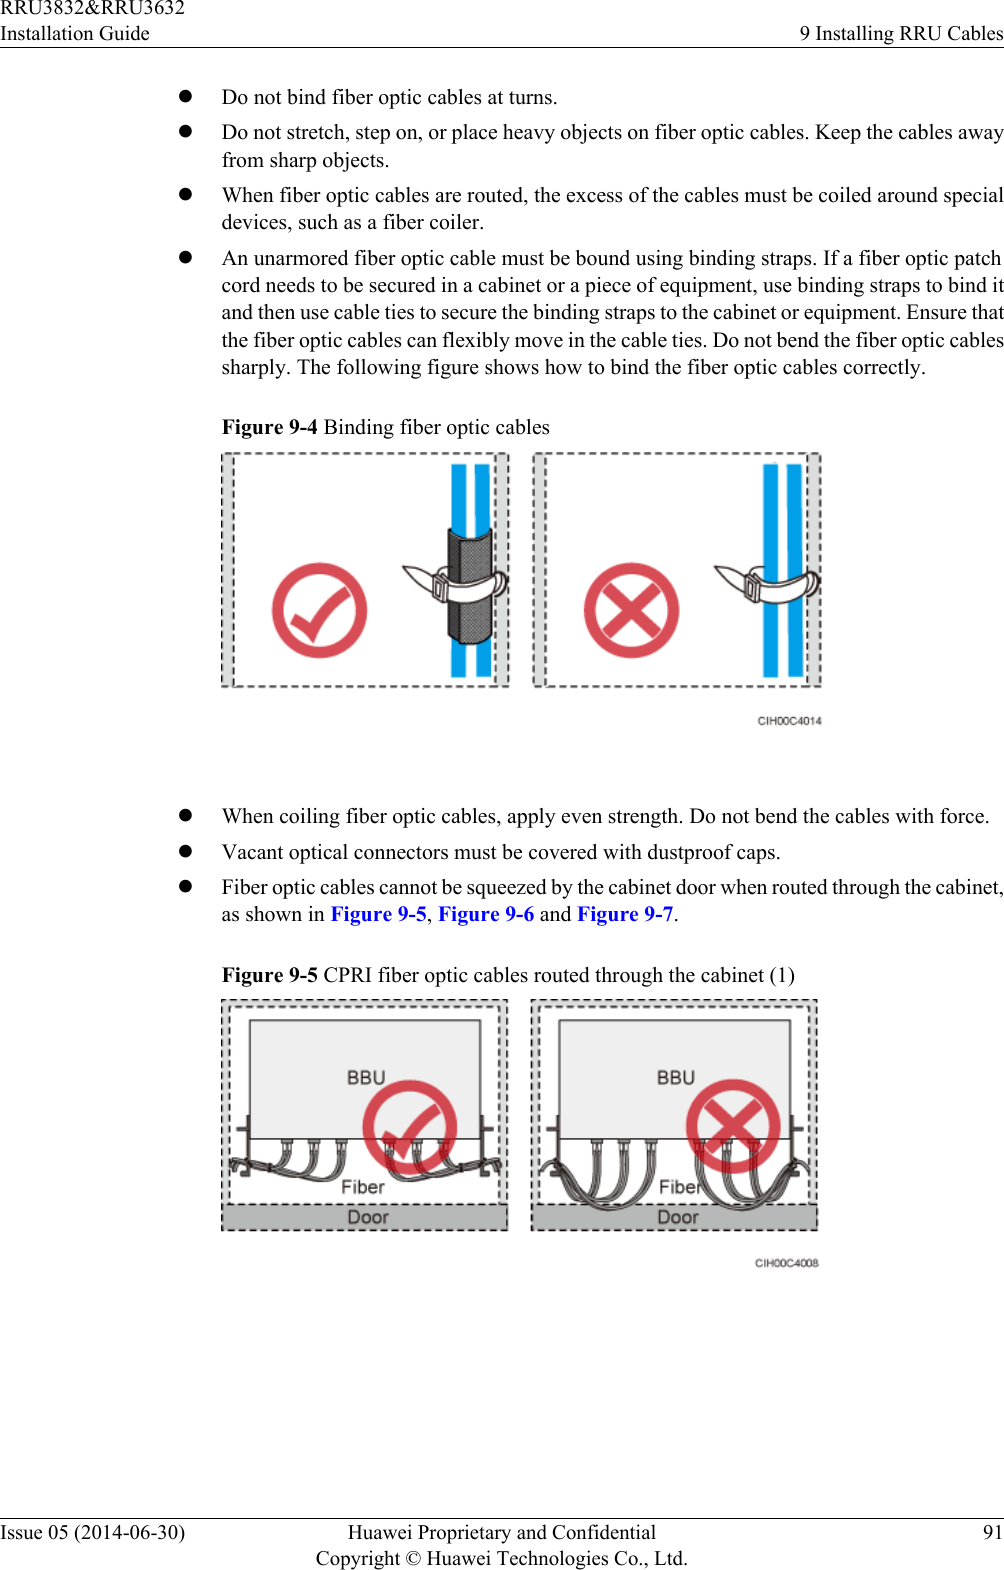 lDo not bind fiber optic cables at turns.lDo not stretch, step on, or place heavy objects on fiber optic cables. Keep the cables awayfrom sharp objects.lWhen fiber optic cables are routed, the excess of the cables must be coiled around specialdevices, such as a fiber coiler.lAn unarmored fiber optic cable must be bound using binding straps. If a fiber optic patchcord needs to be secured in a cabinet or a piece of equipment, use binding straps to bind itand then use cable ties to secure the binding straps to the cabinet or equipment. Ensure thatthe fiber optic cables can flexibly move in the cable ties. Do not bend the fiber optic cablessharply. The following figure shows how to bind the fiber optic cables correctly.Figure 9-4 Binding fiber optic cables lWhen coiling fiber optic cables, apply even strength. Do not bend the cables with force.lVacant optical connectors must be covered with dustproof caps.lFiber optic cables cannot be squeezed by the cabinet door when routed through the cabinet,as shown in Figure 9-5, Figure 9-6 and Figure 9-7.Figure 9-5 CPRI fiber optic cables routed through the cabinet (1) RRU3832&amp;RRU3632Installation Guide 9 Installing RRU CablesIssue 05 (2014-06-30) Huawei Proprietary and ConfidentialCopyright © Huawei Technologies Co., Ltd.91